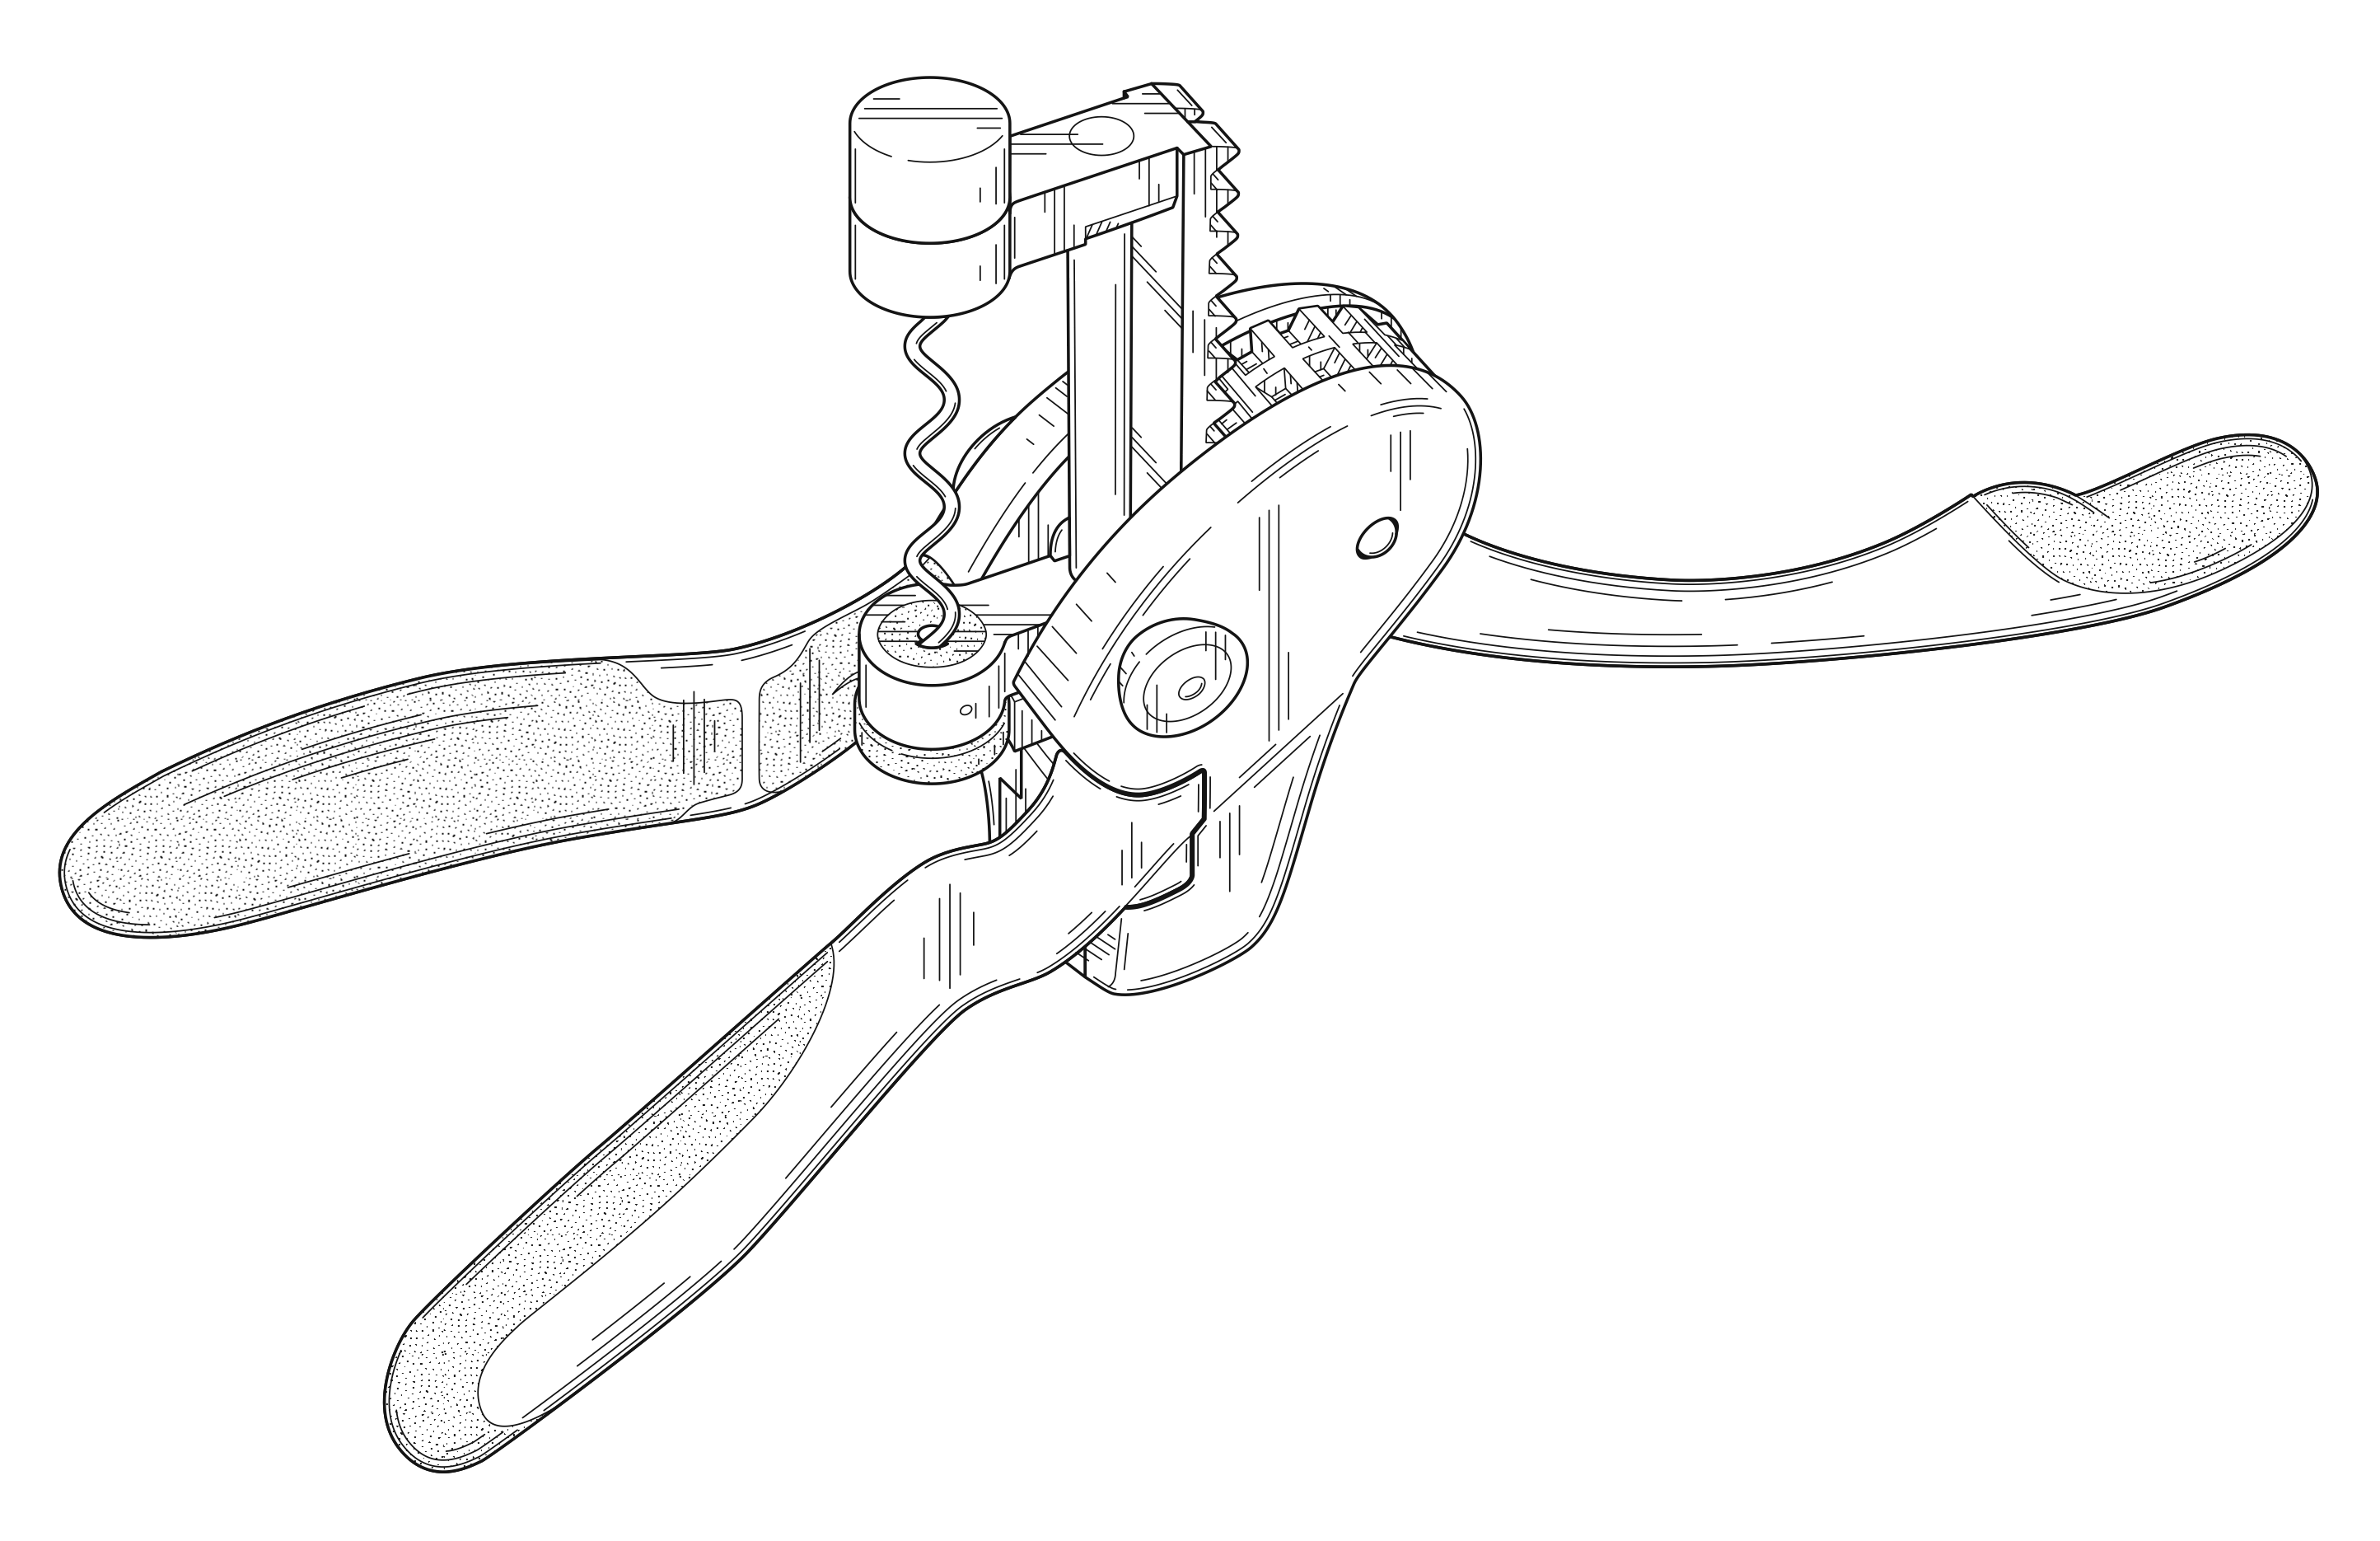 10_ptiserviceco_patent_drawing_design.png